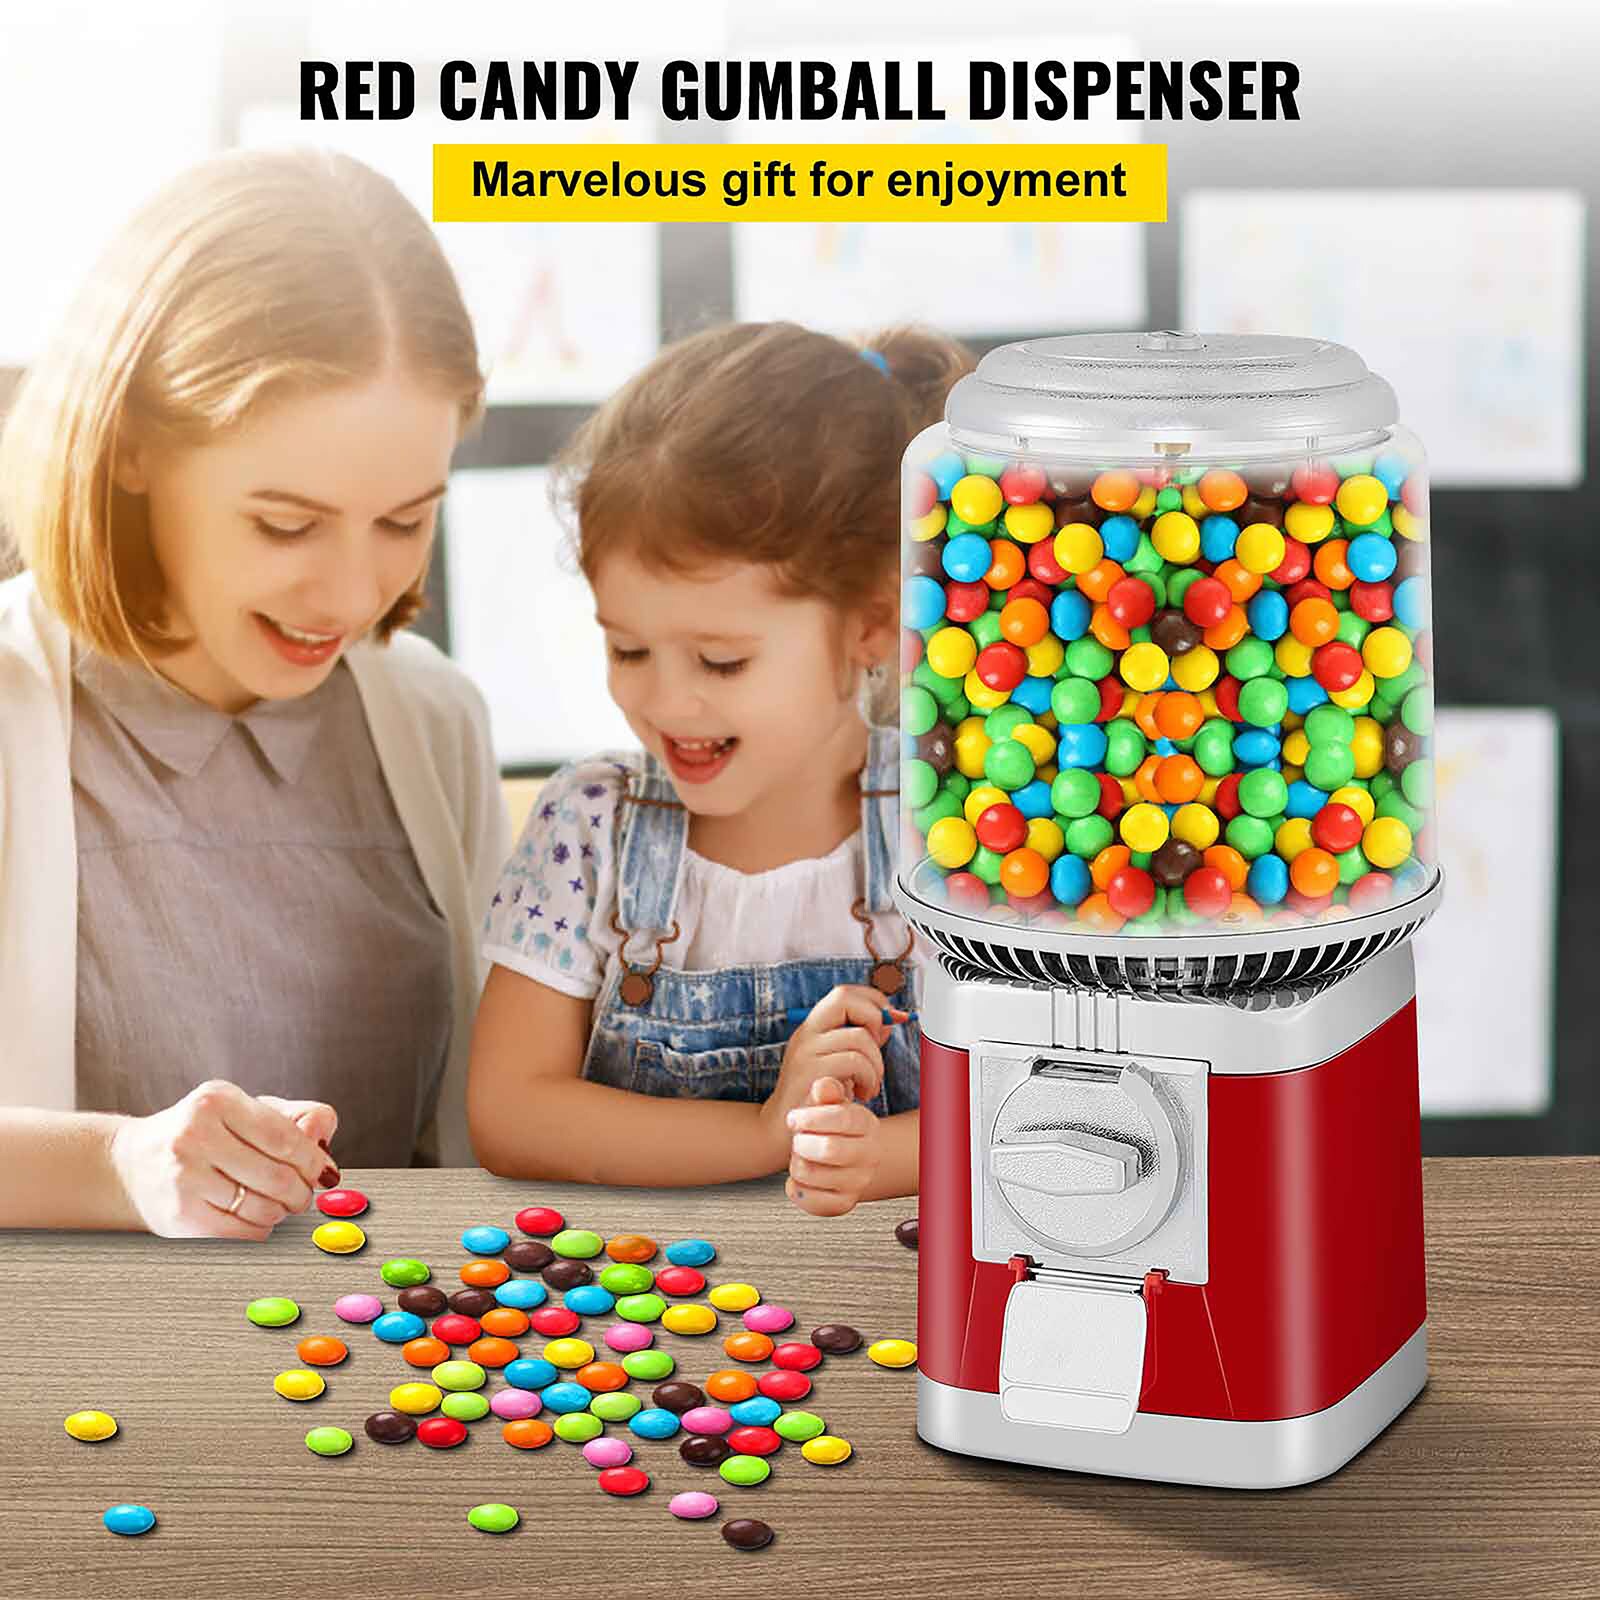 Gumball Machine - 12 Inch Candy Dispenser for 0.62 Inch Bubble Gum Ball and  More - Vintage Heavy Duty Red Metal with Large Glass Ball- Easy Twist-Off